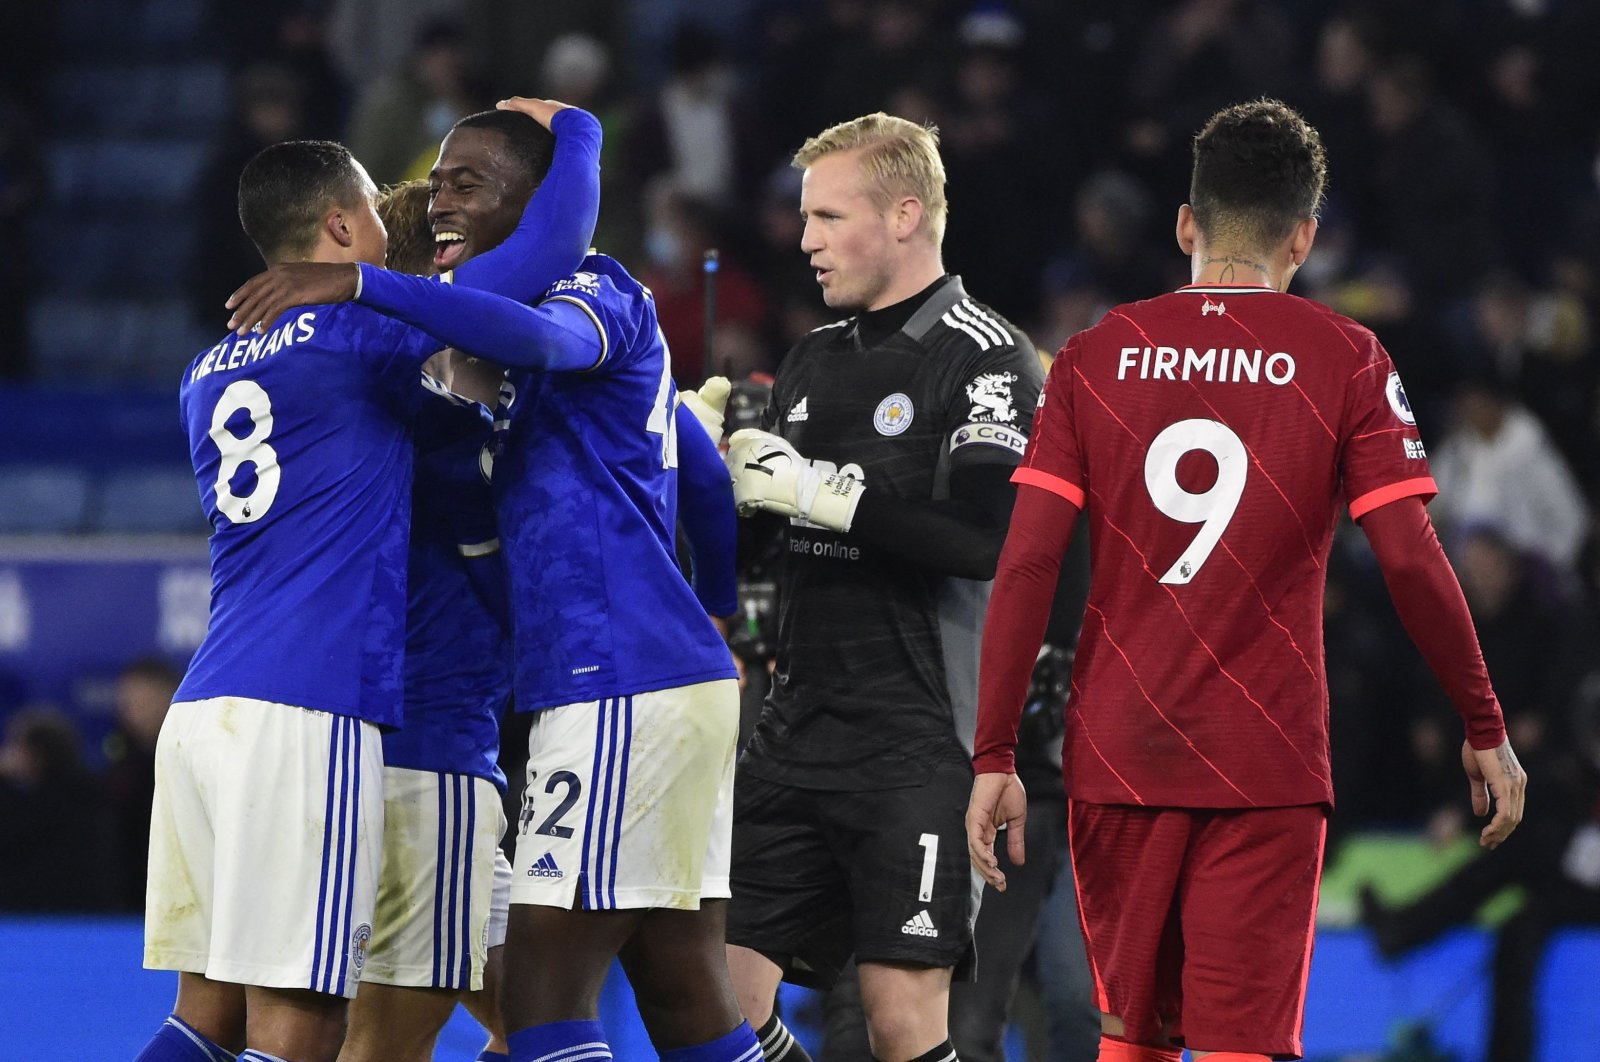 Leicester&#039;s Kasper Schmeichel (C) celebrates with teammates as Liverpool&#039;s Roberto Firmino (R) looks dejected, Leicester, England, Dec. 28, 2021. (Reuters Photo)